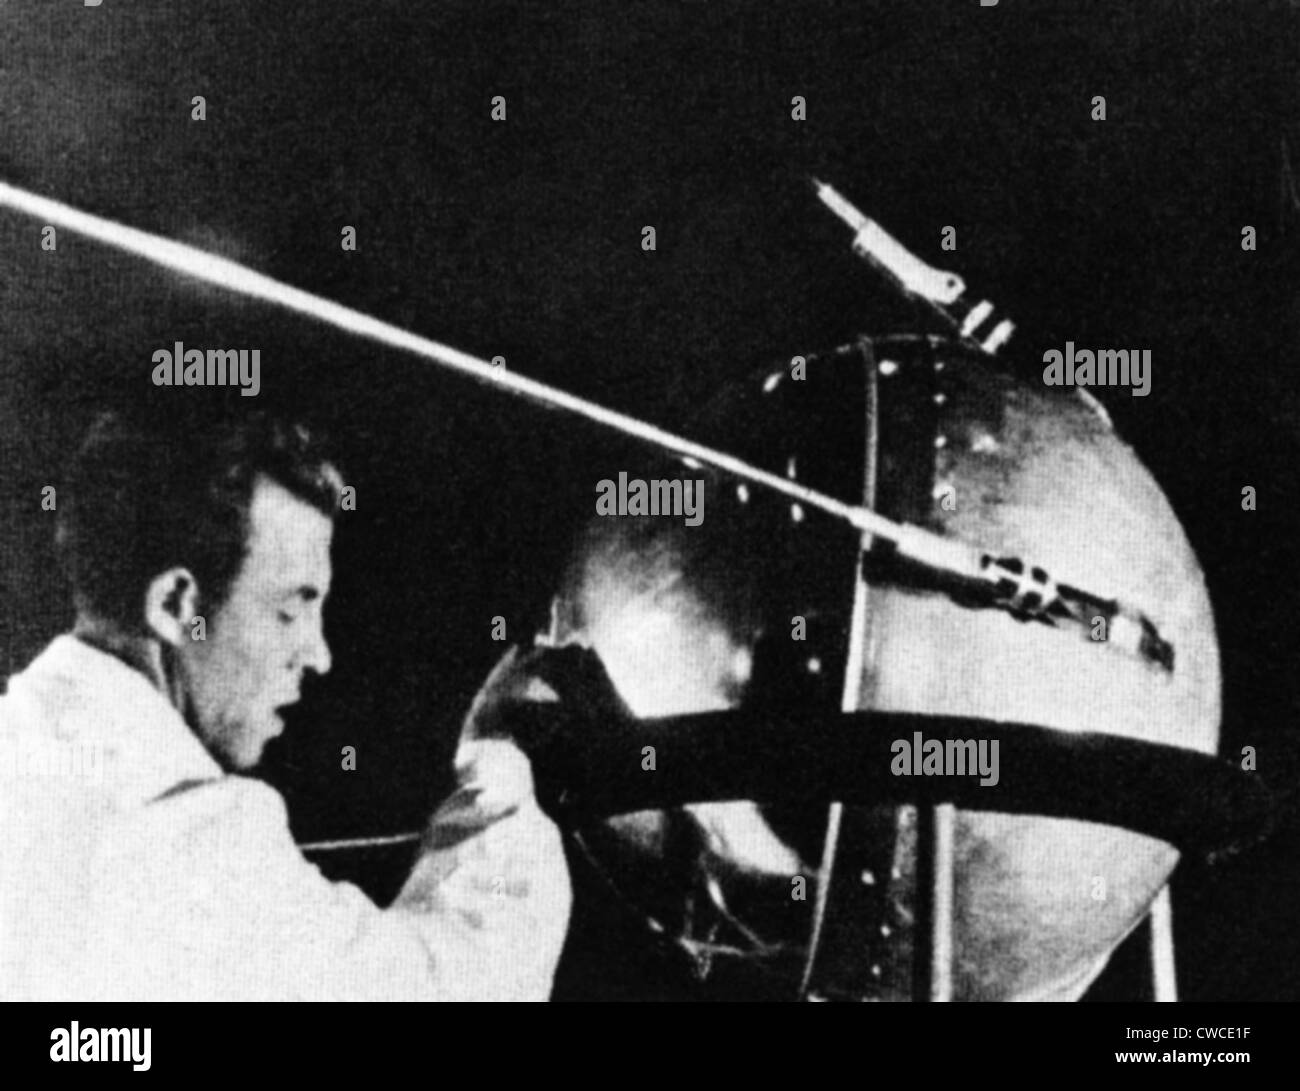 Russian technician with Sputnik 1. The Russian satellite was the first human-made object into space. It was a pressurized Stock Photo